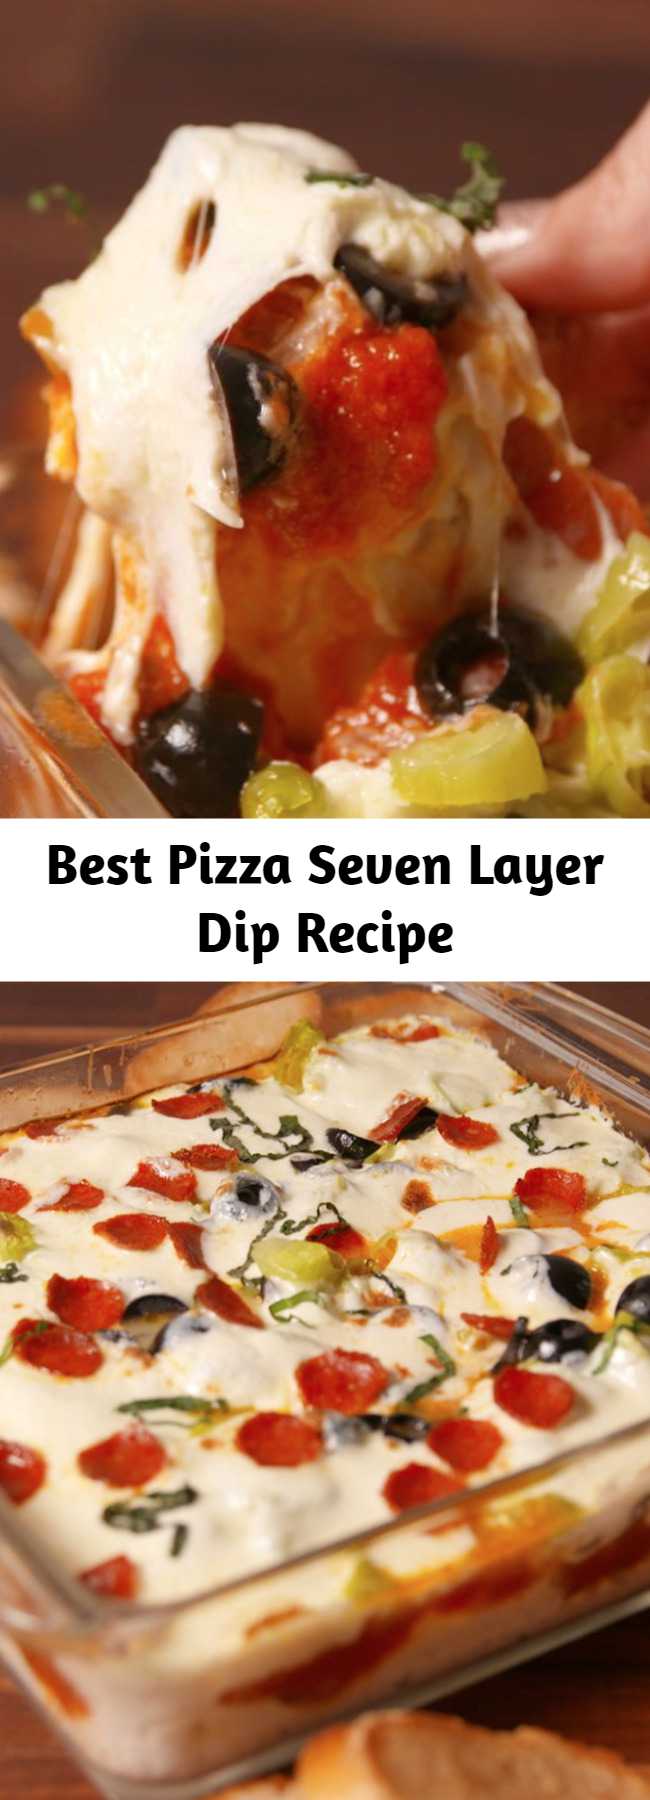 Best Pizza Seven Layer Dip Recipe - This pizza seven-layer dip is the cheesiest party appetizer you'll ever have. #easyrecipes #dips #fingerfoods #pizzadip #partyapps #partyappetizers #superbowlrecipes